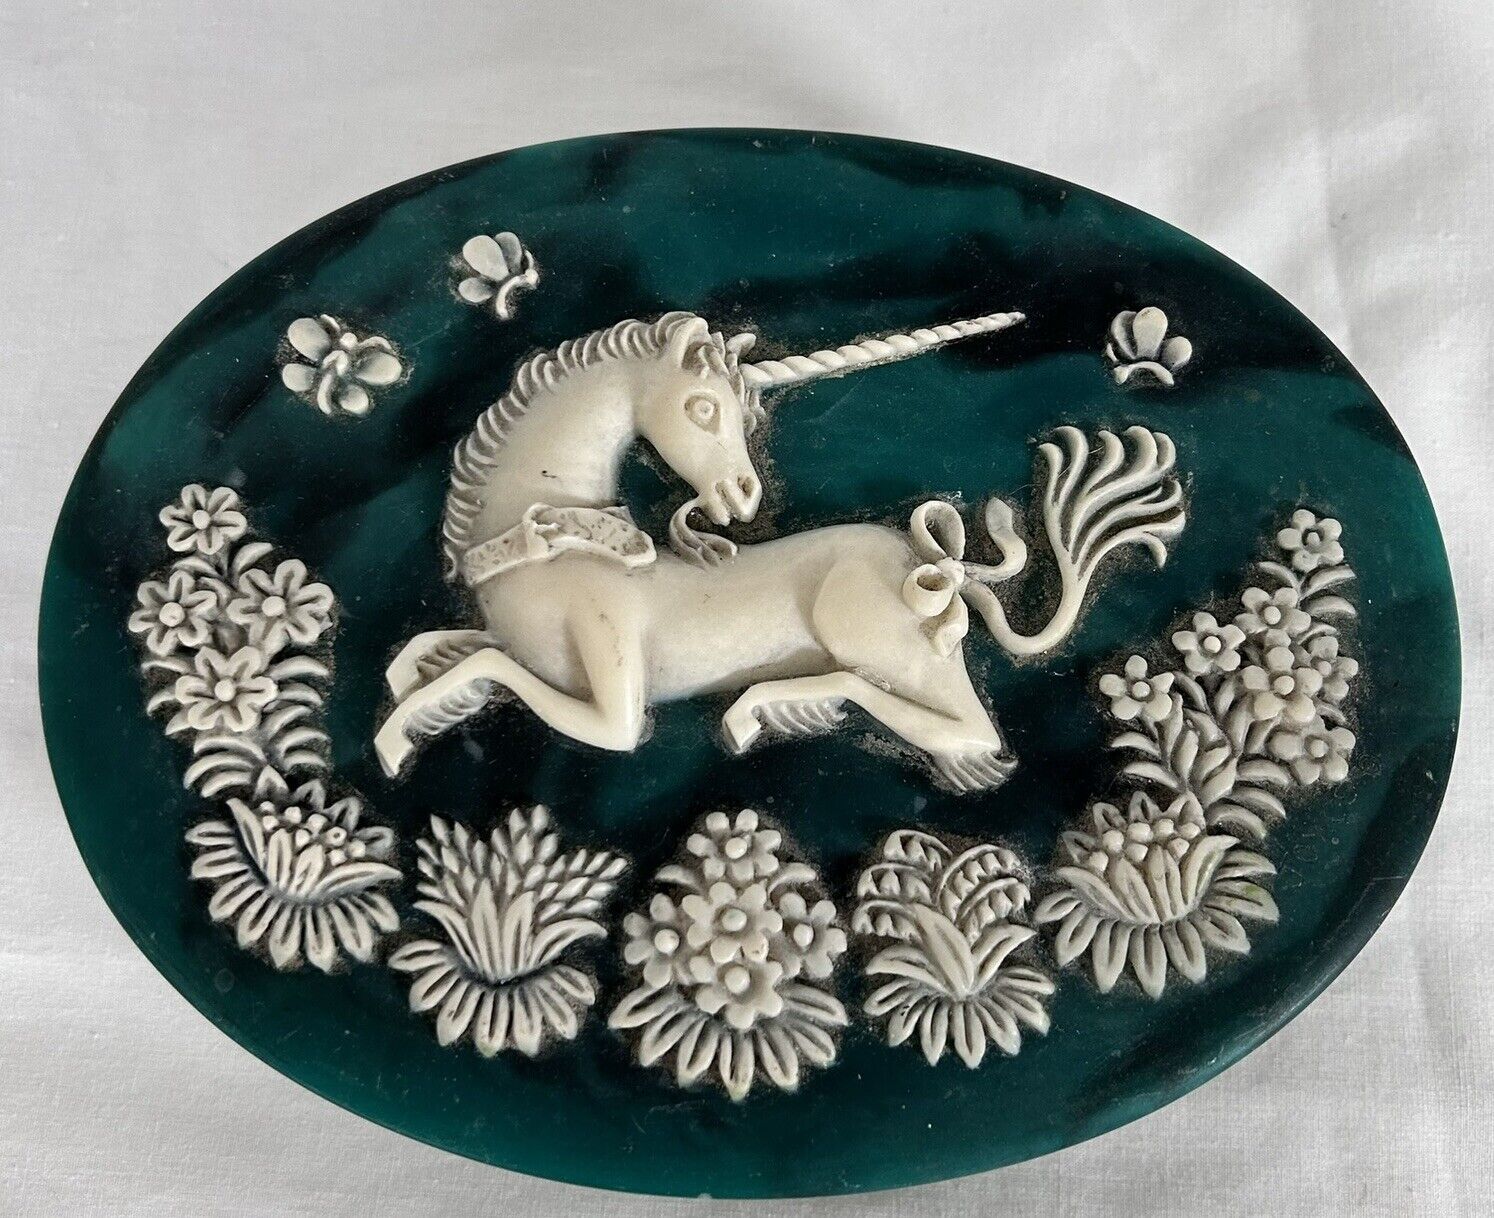 Vintage Incolay Unicorn Jewelry Box Teal And White, Mint Condition